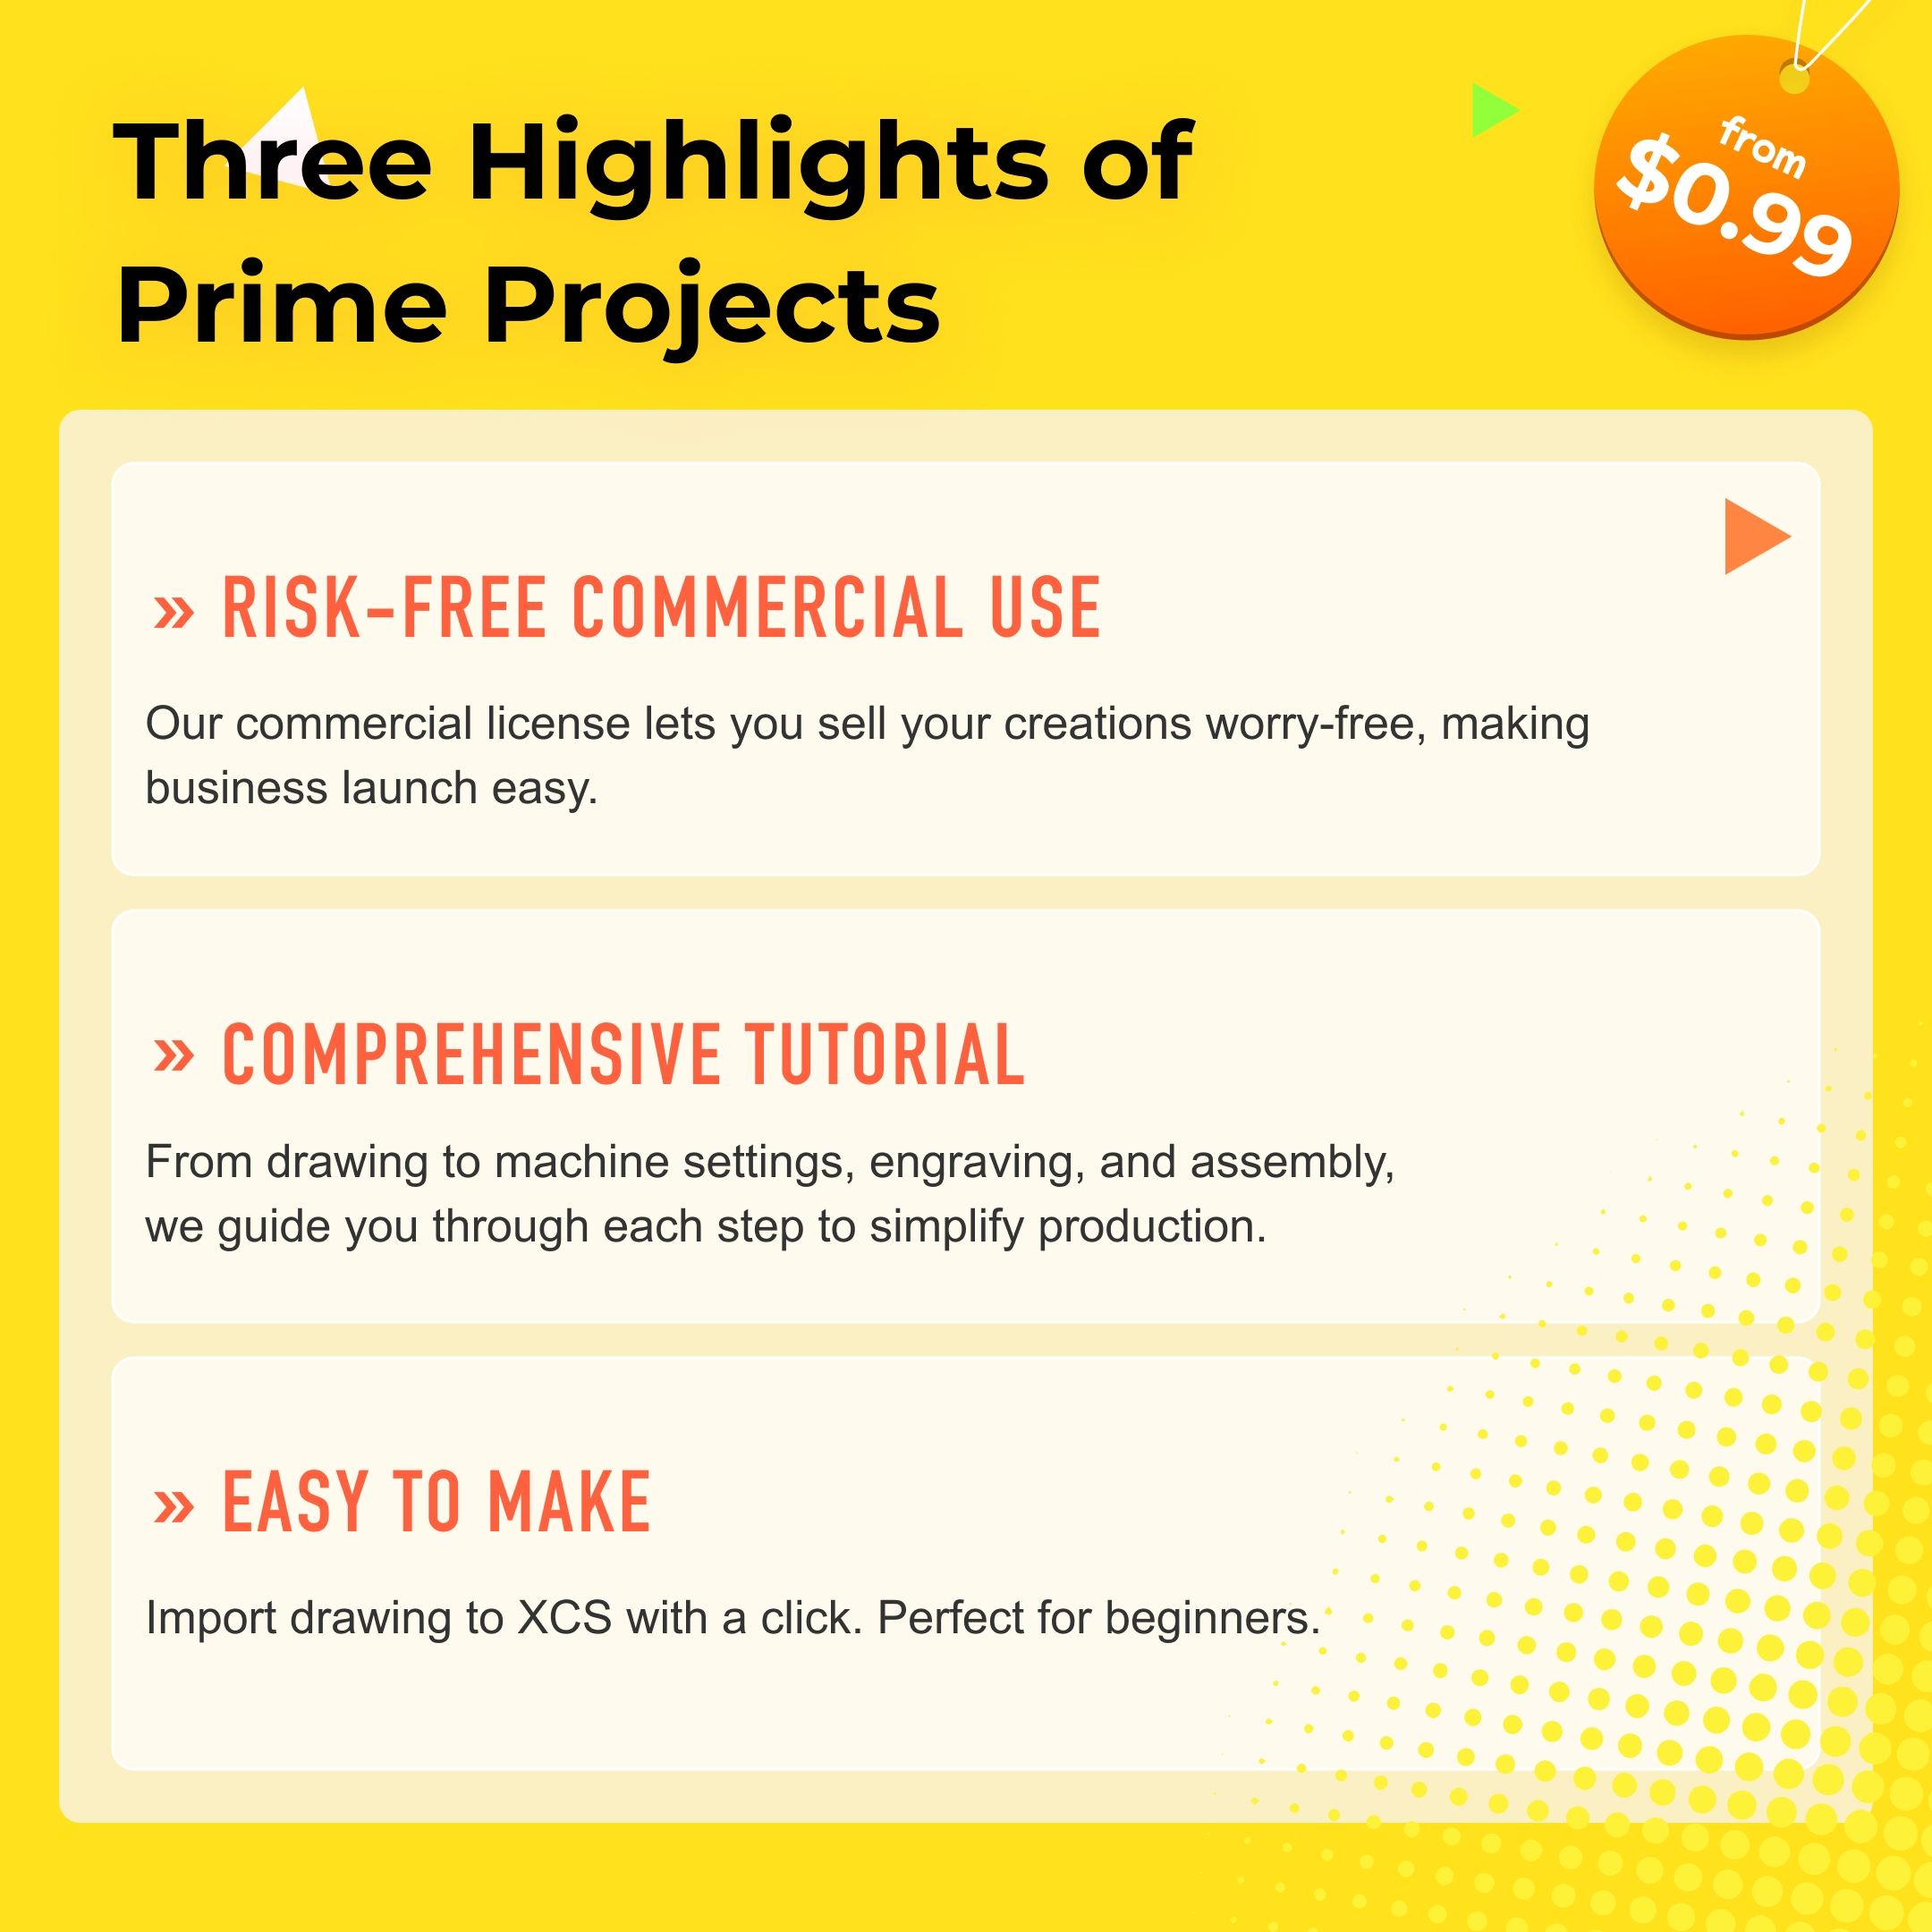 Three Highlights of Prime Projects